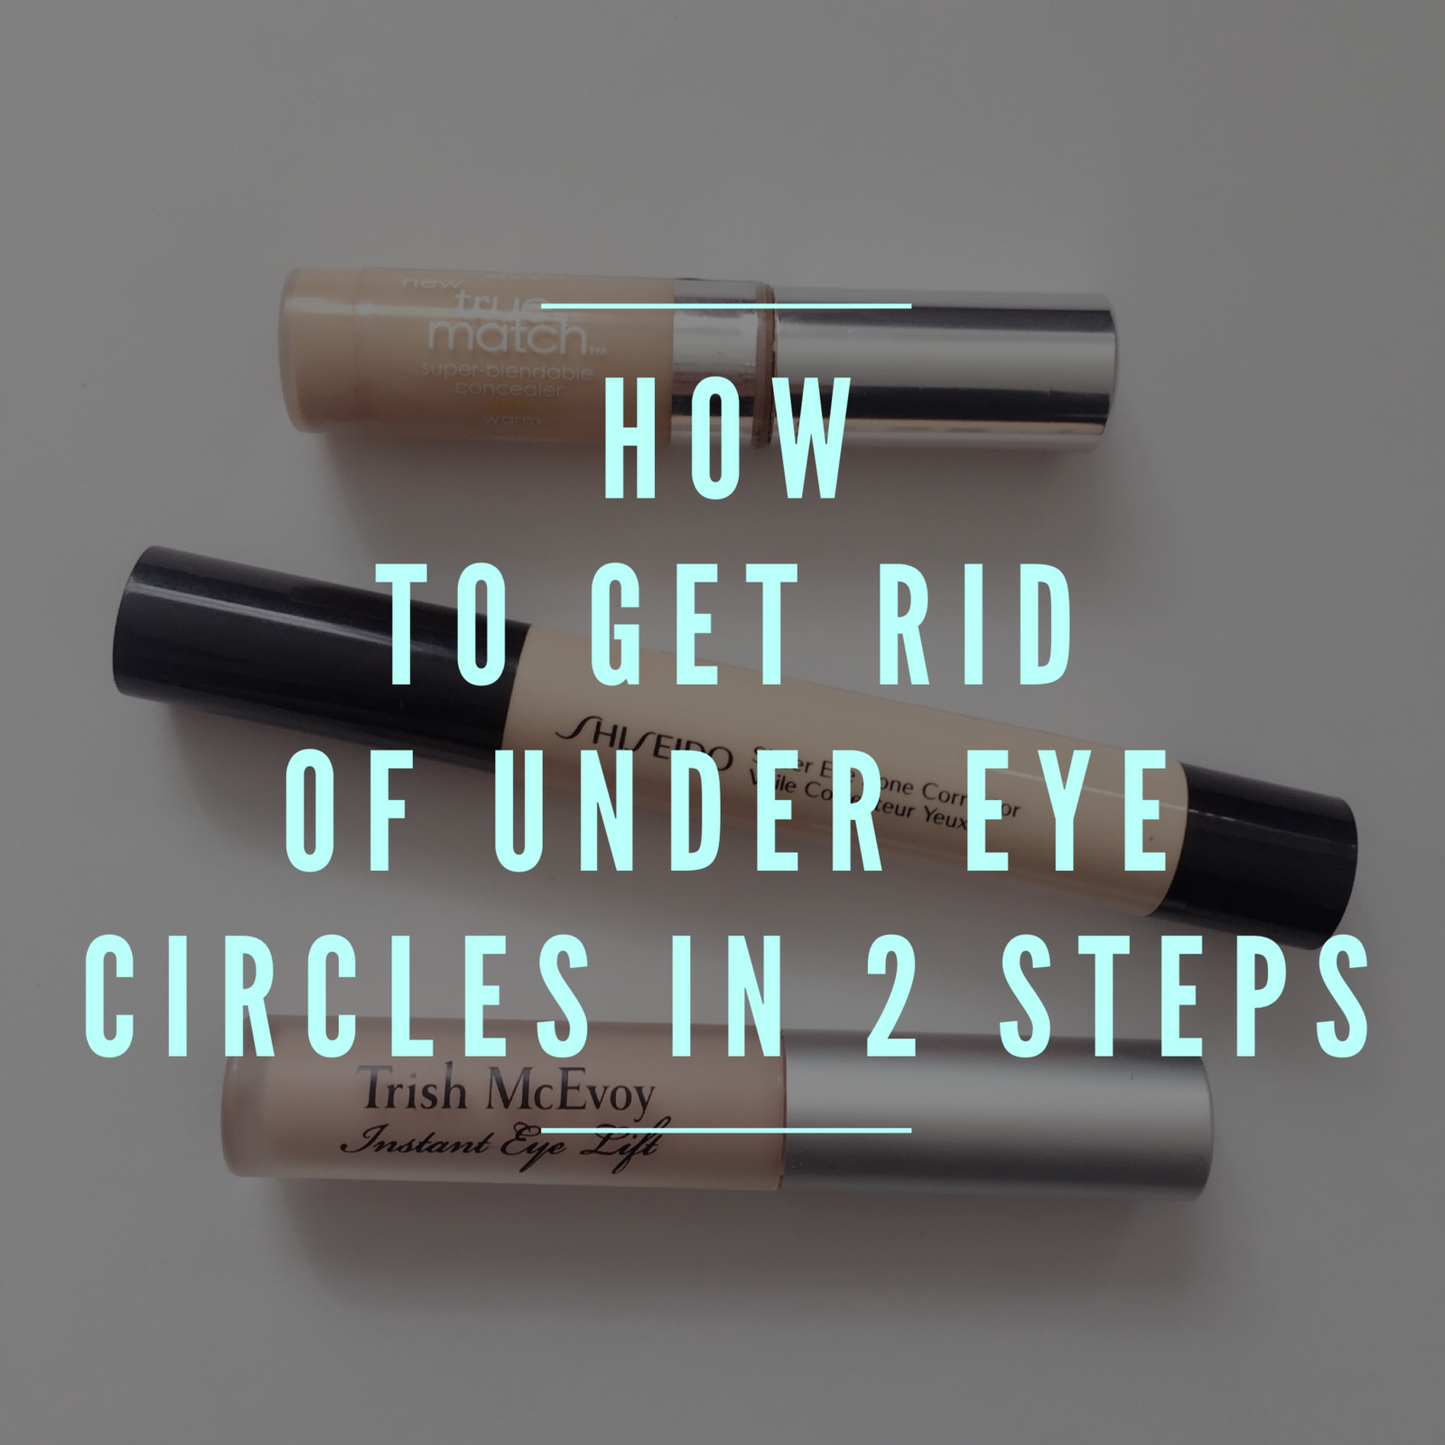 How To Get Rid Of Under Eye Circles In 2 Steps